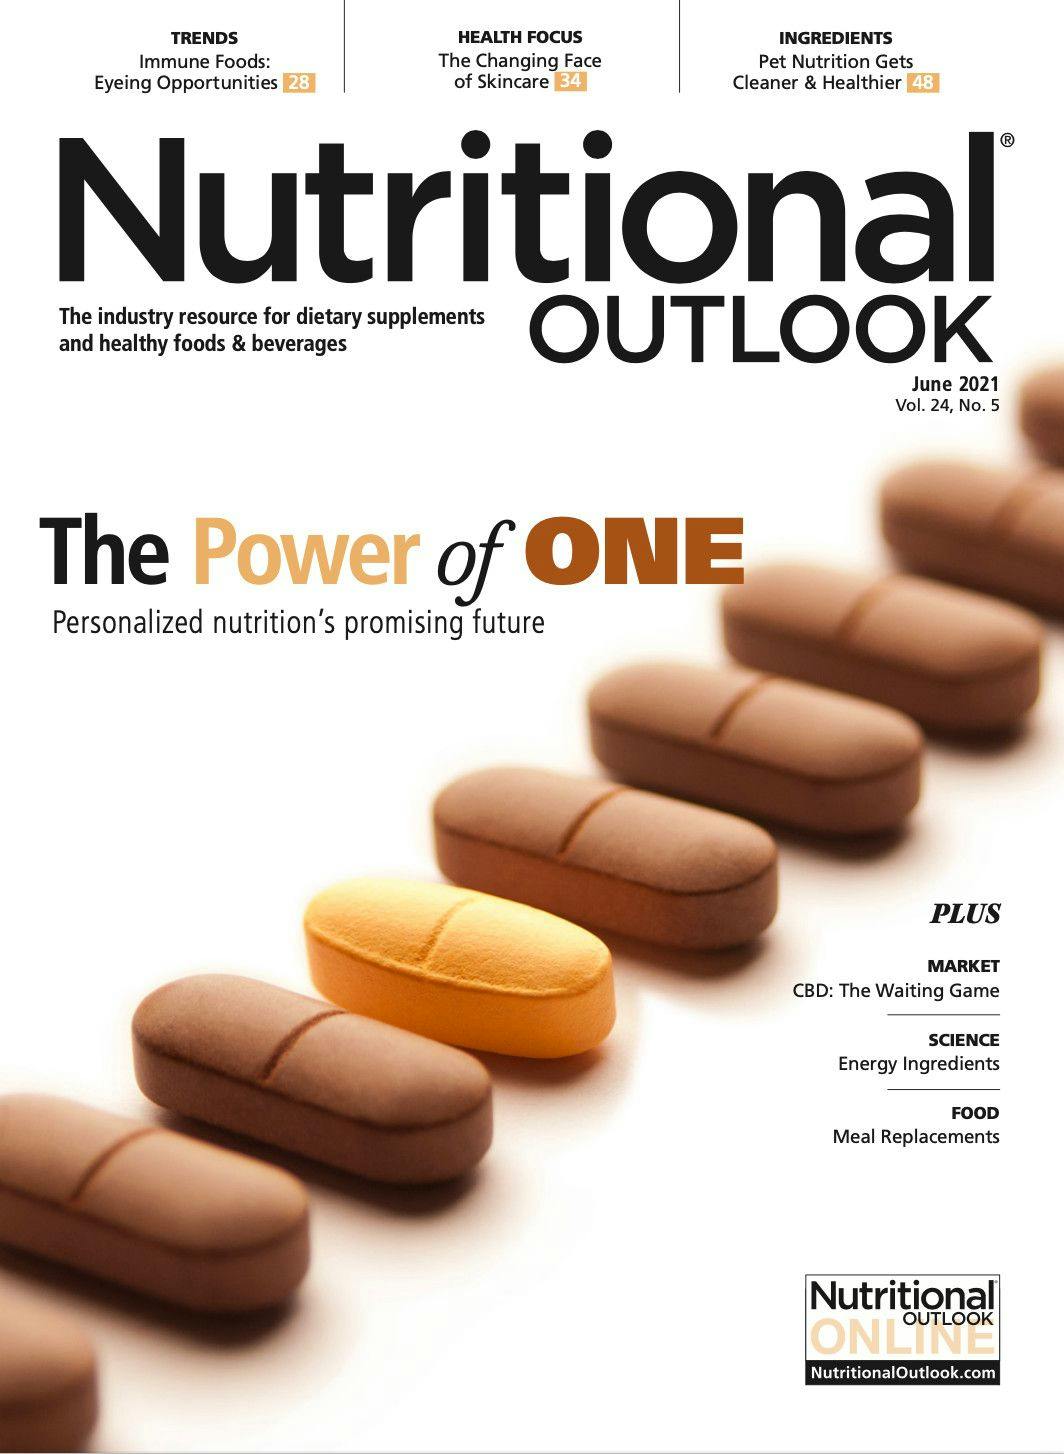 Nutritional Outlook Vol. 24 No. 5